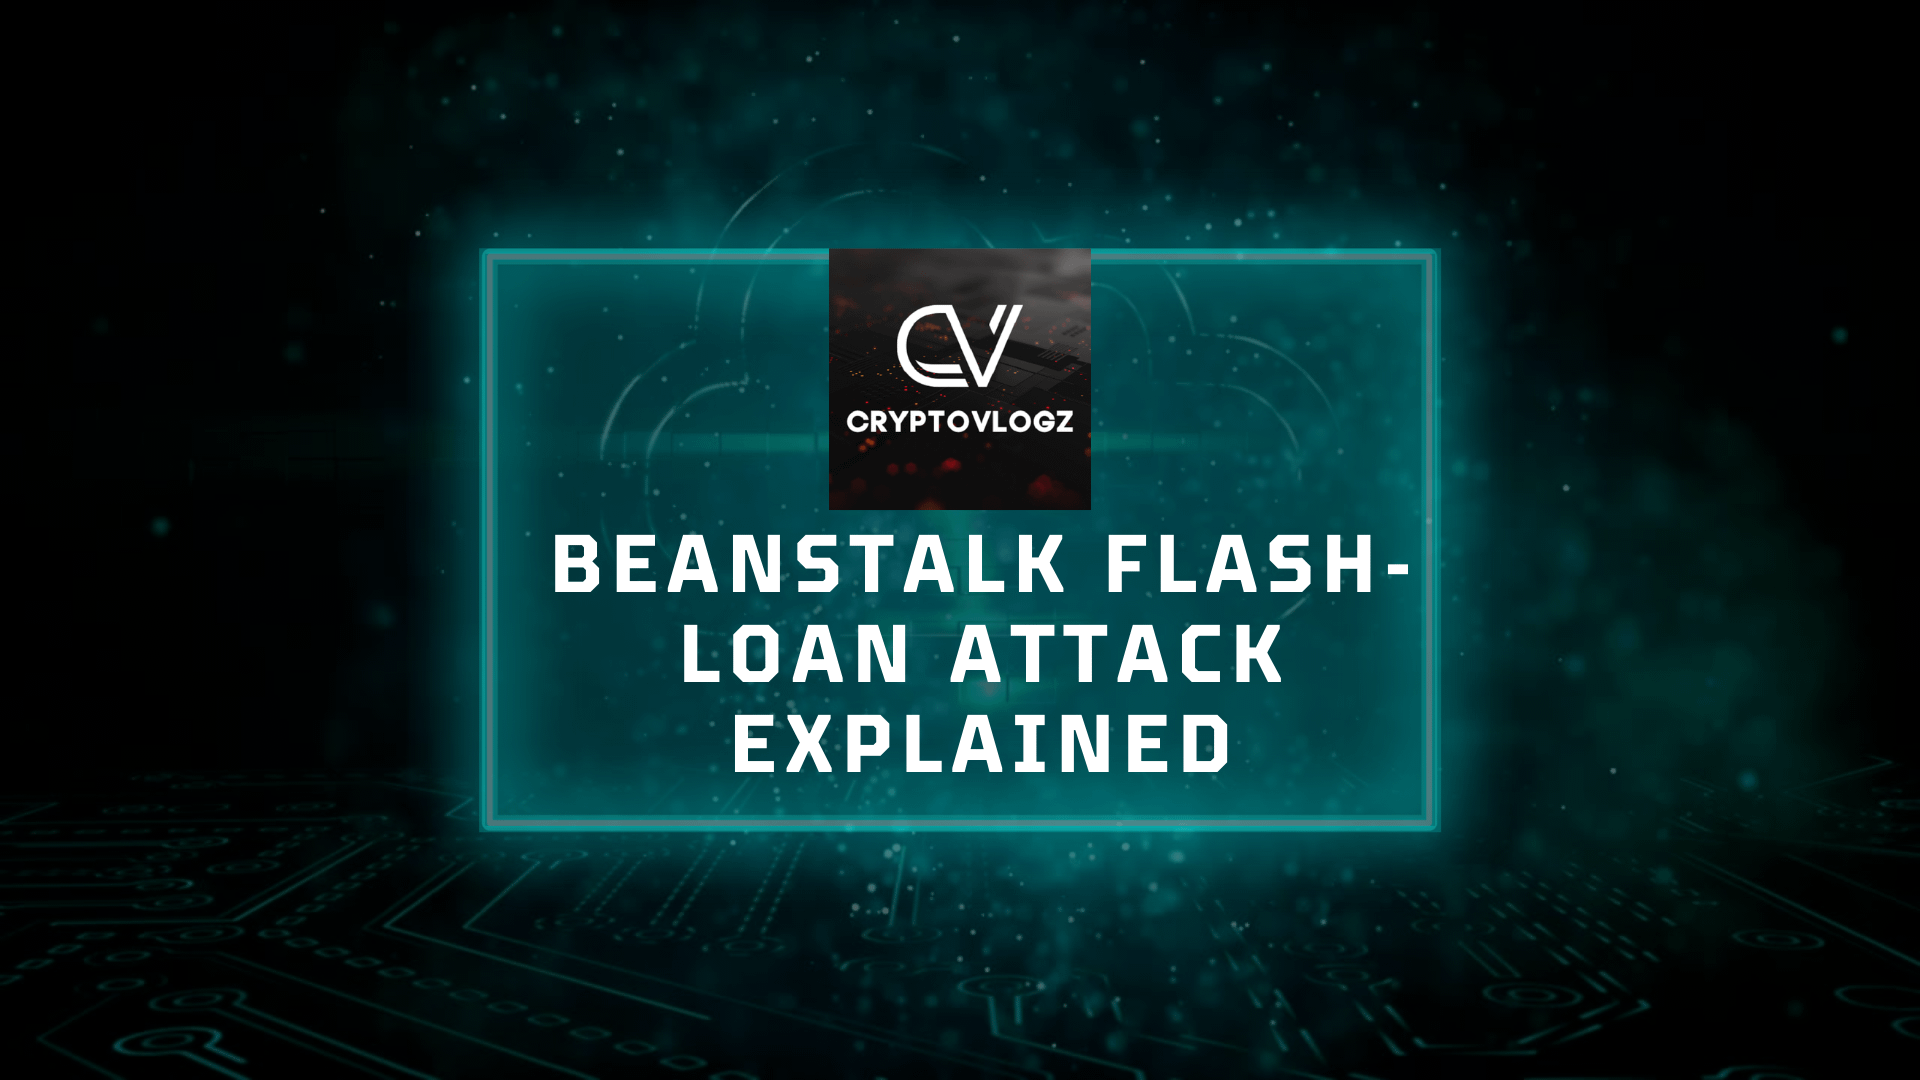 Beanstalk Flash-Loan Attack Explained: USD 80m Successfully Stolen